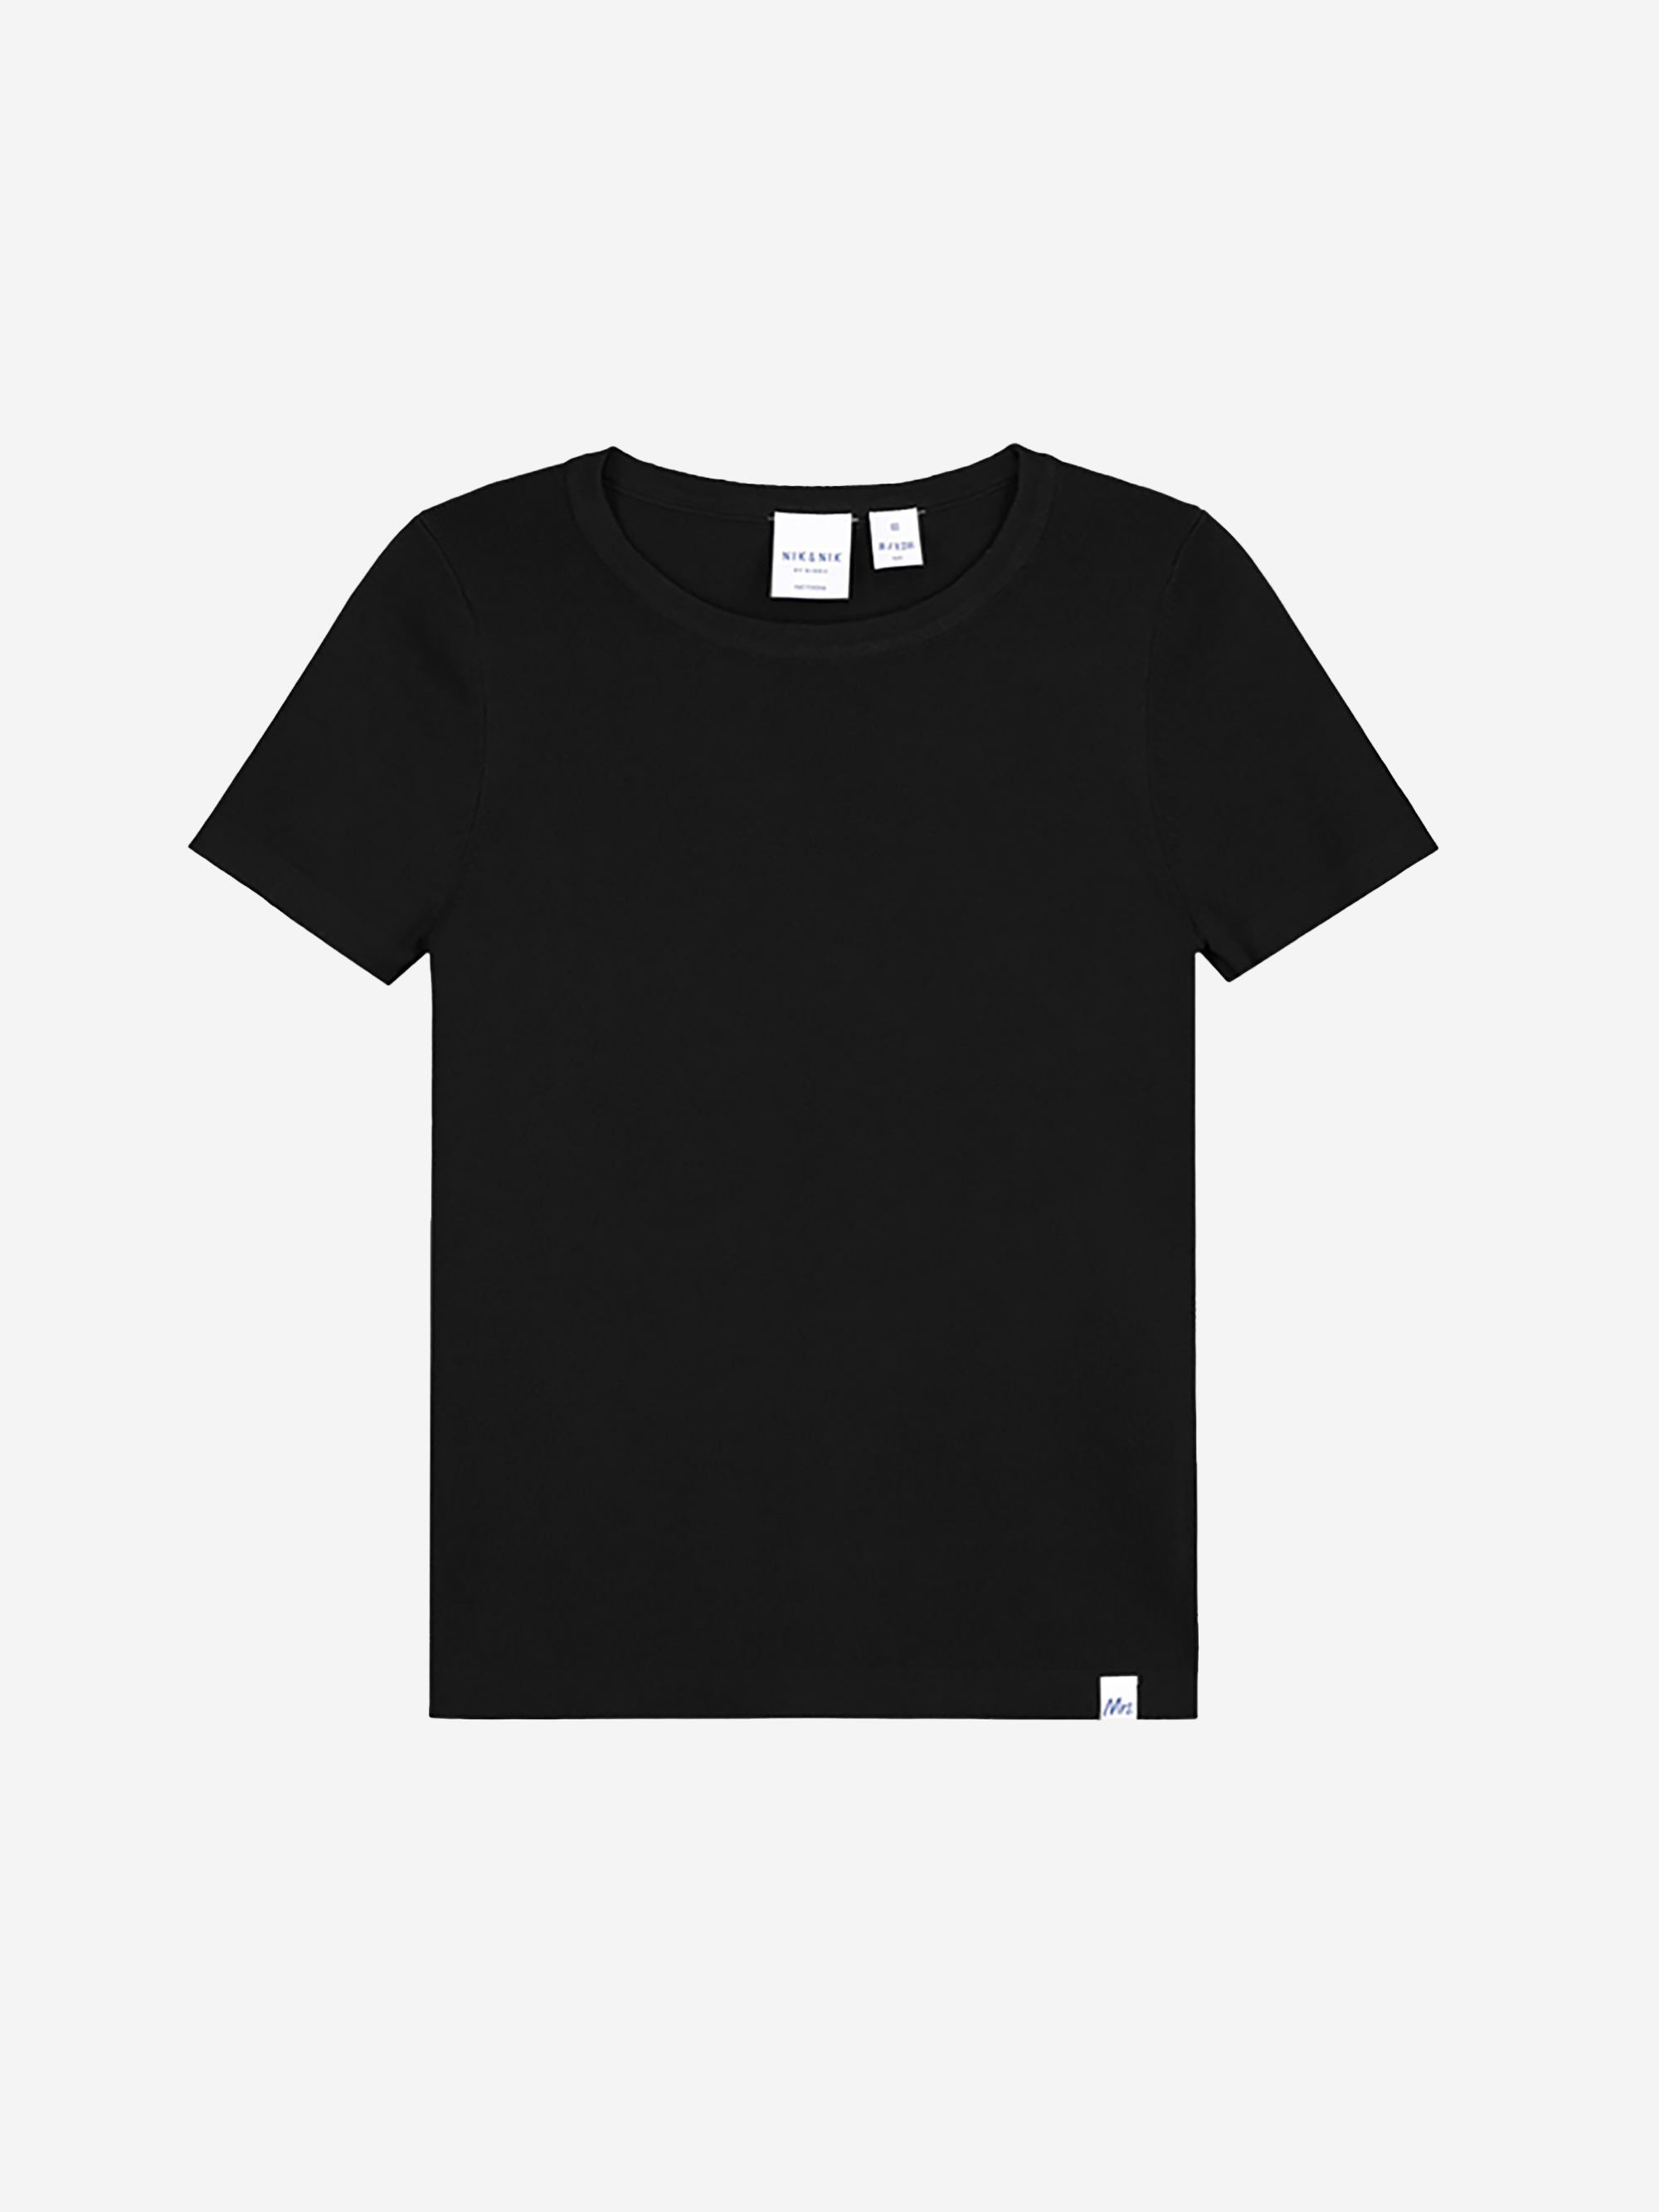 Black top with short sleeves